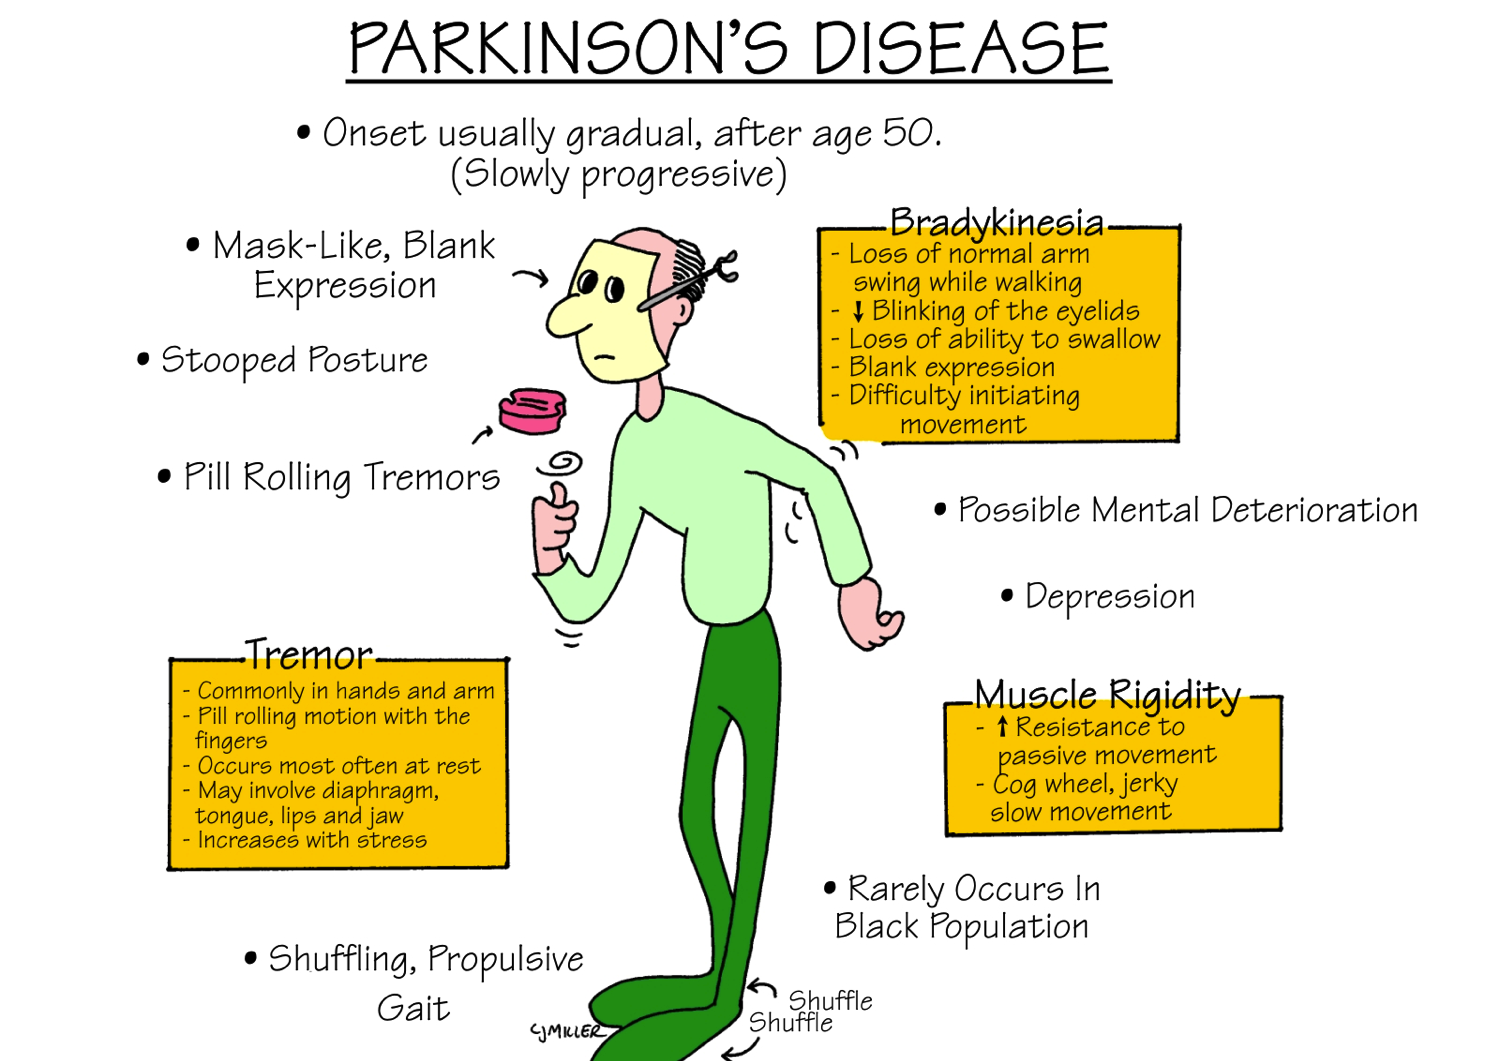 Everything you need to know about Parkinson